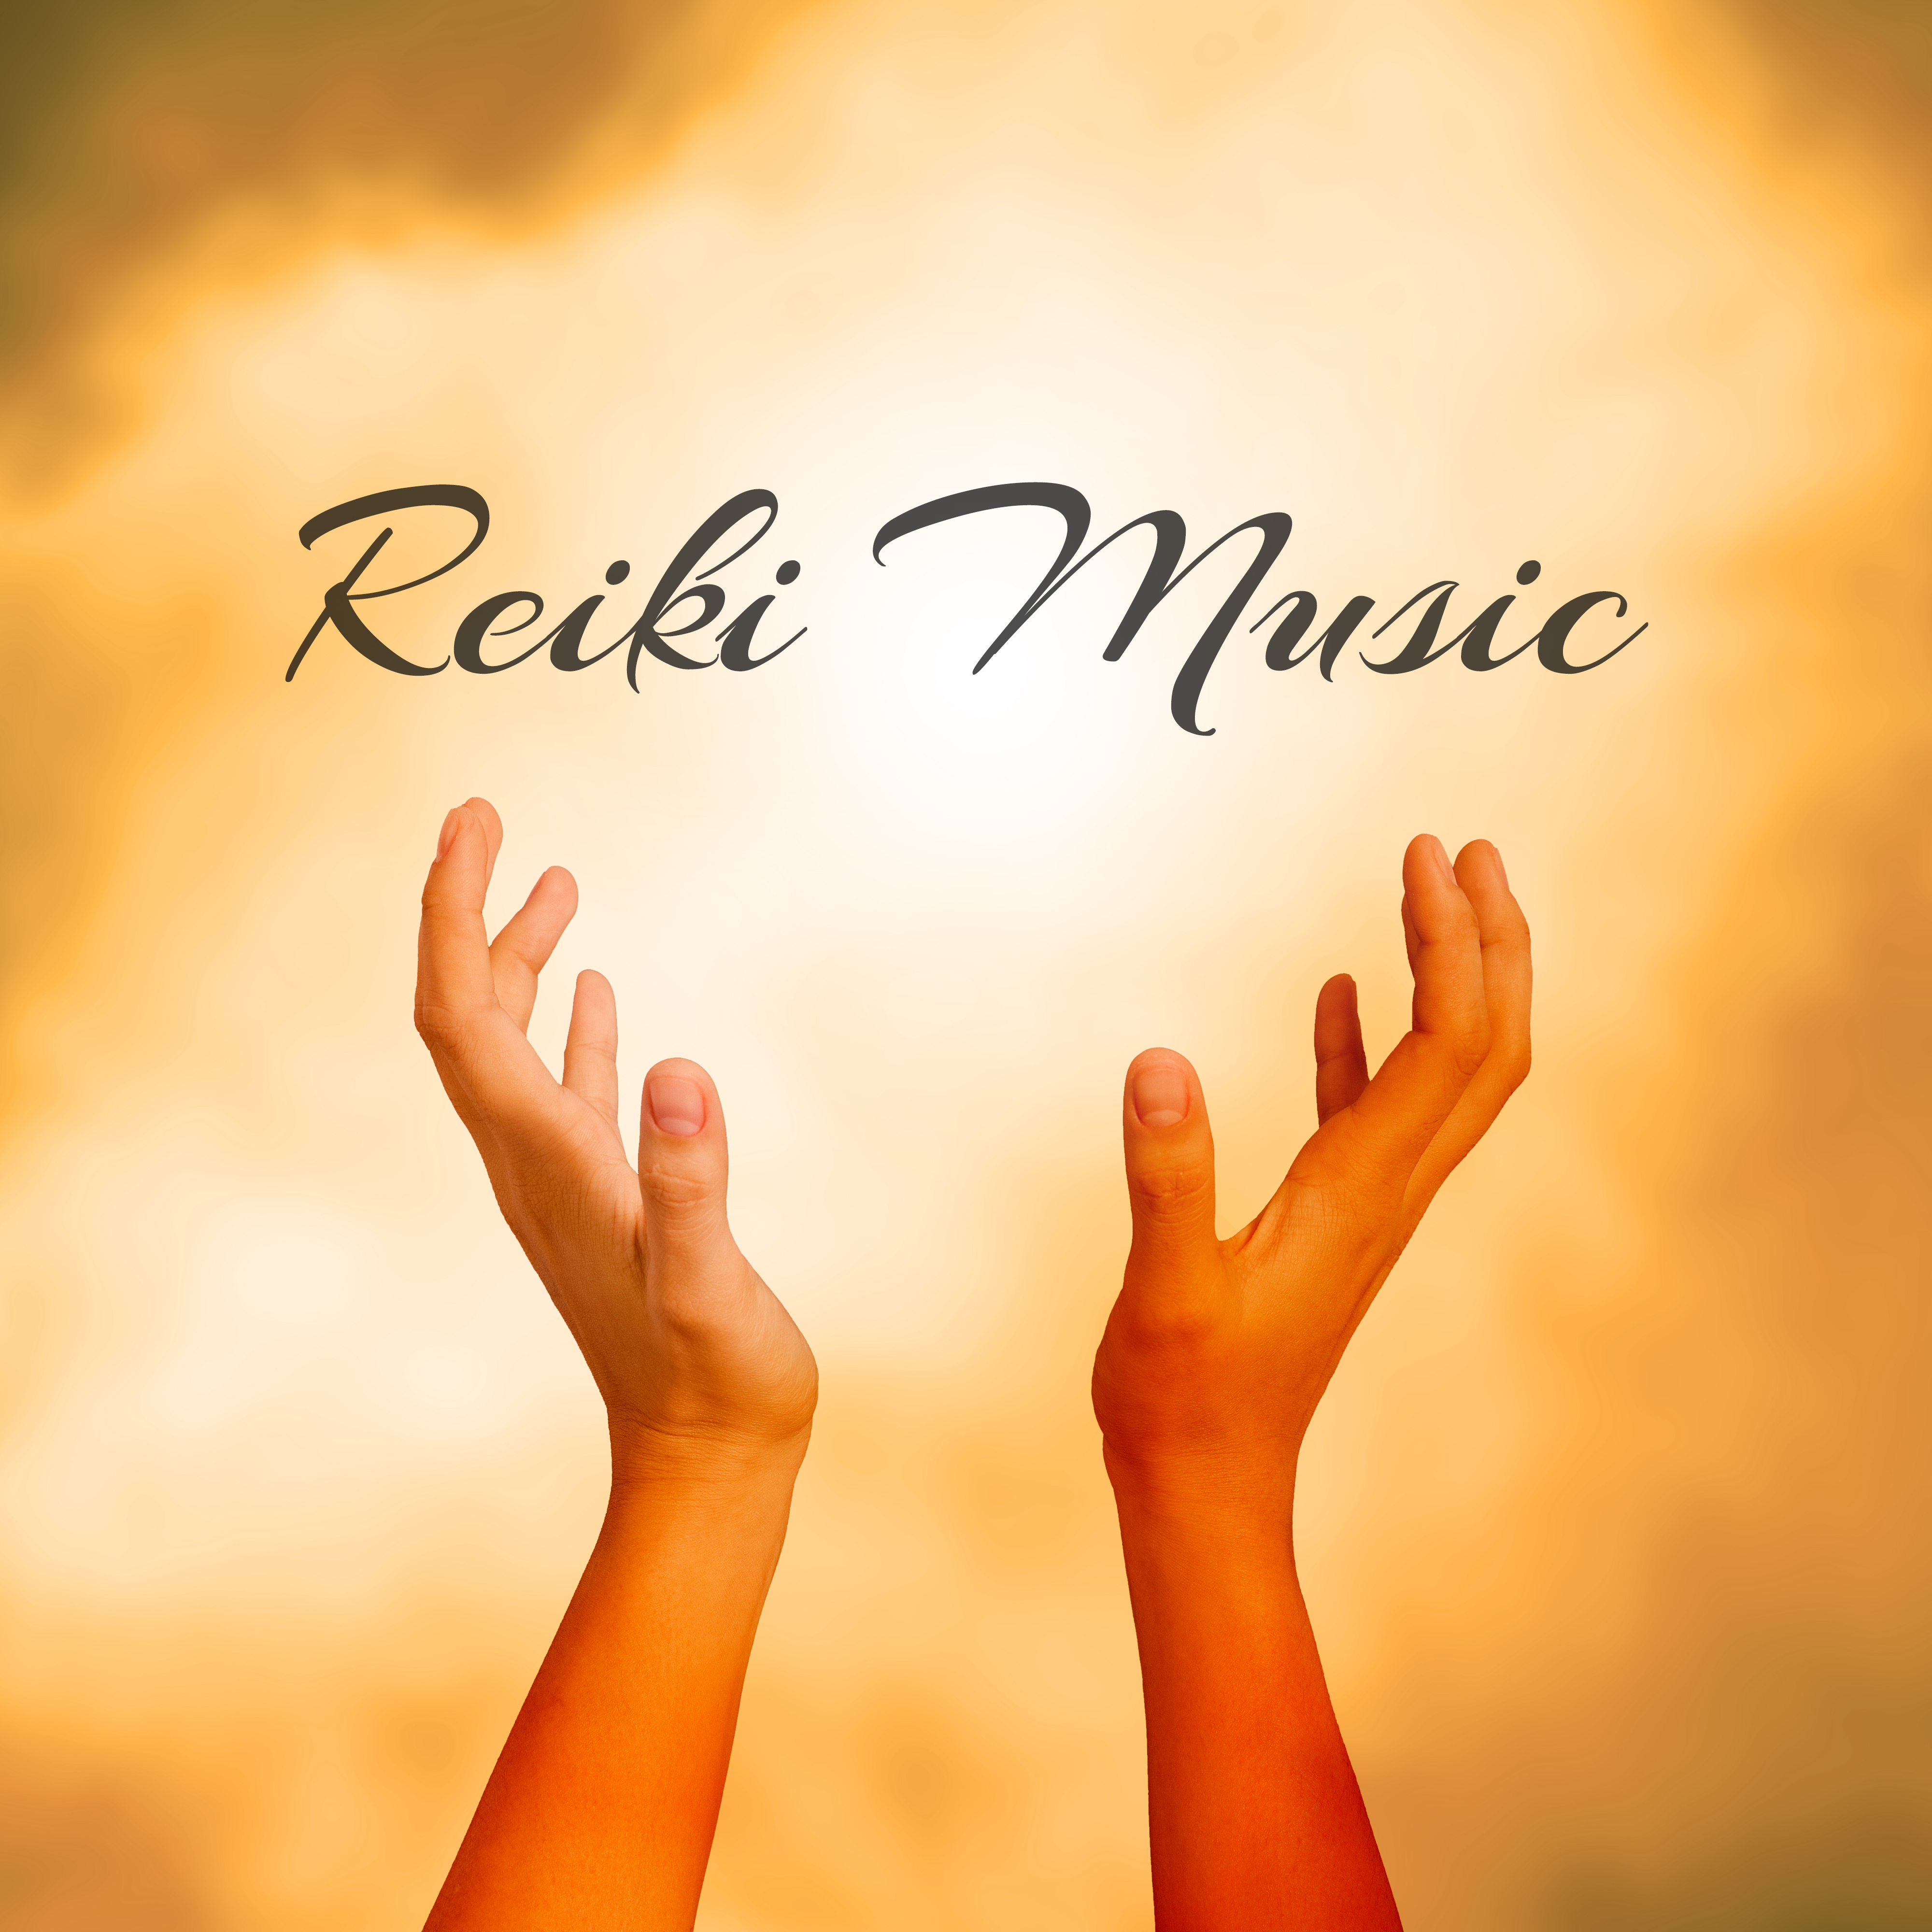 Reiki Music  Sounds of Yoga, Deep Meditation, Focus, Concentration, Pure Mind, Nature Sounds for Relaxation, Harmony